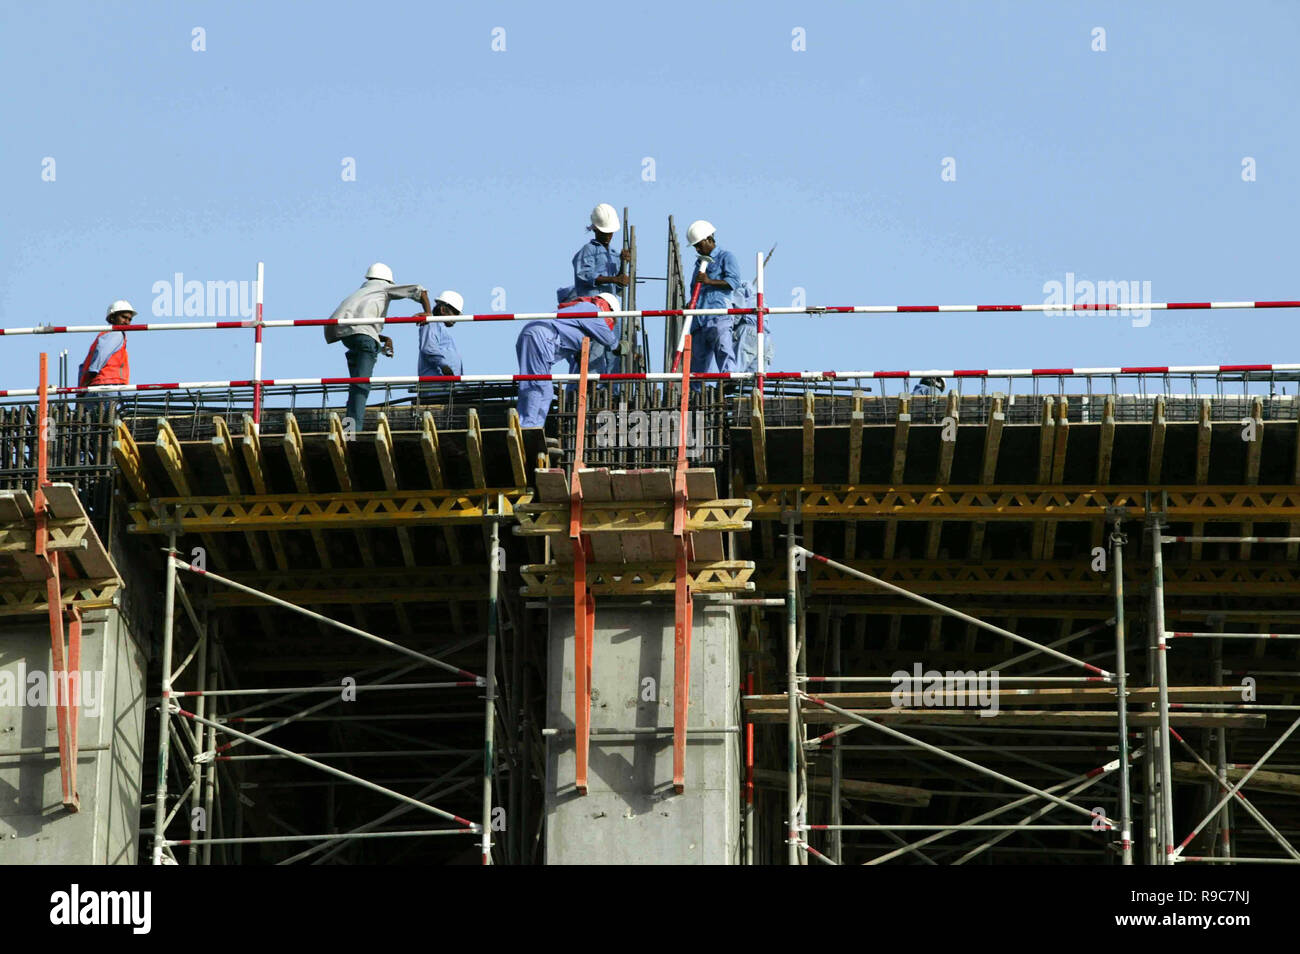 Dubai, United Arab Emirates, UAE - 14JUN2004: Workers silhouetted during the late afternoon while laying a building foundation in the Dubai Marina area which was a hub of hundreds of major construction projects, during the boom times. Stock Photo